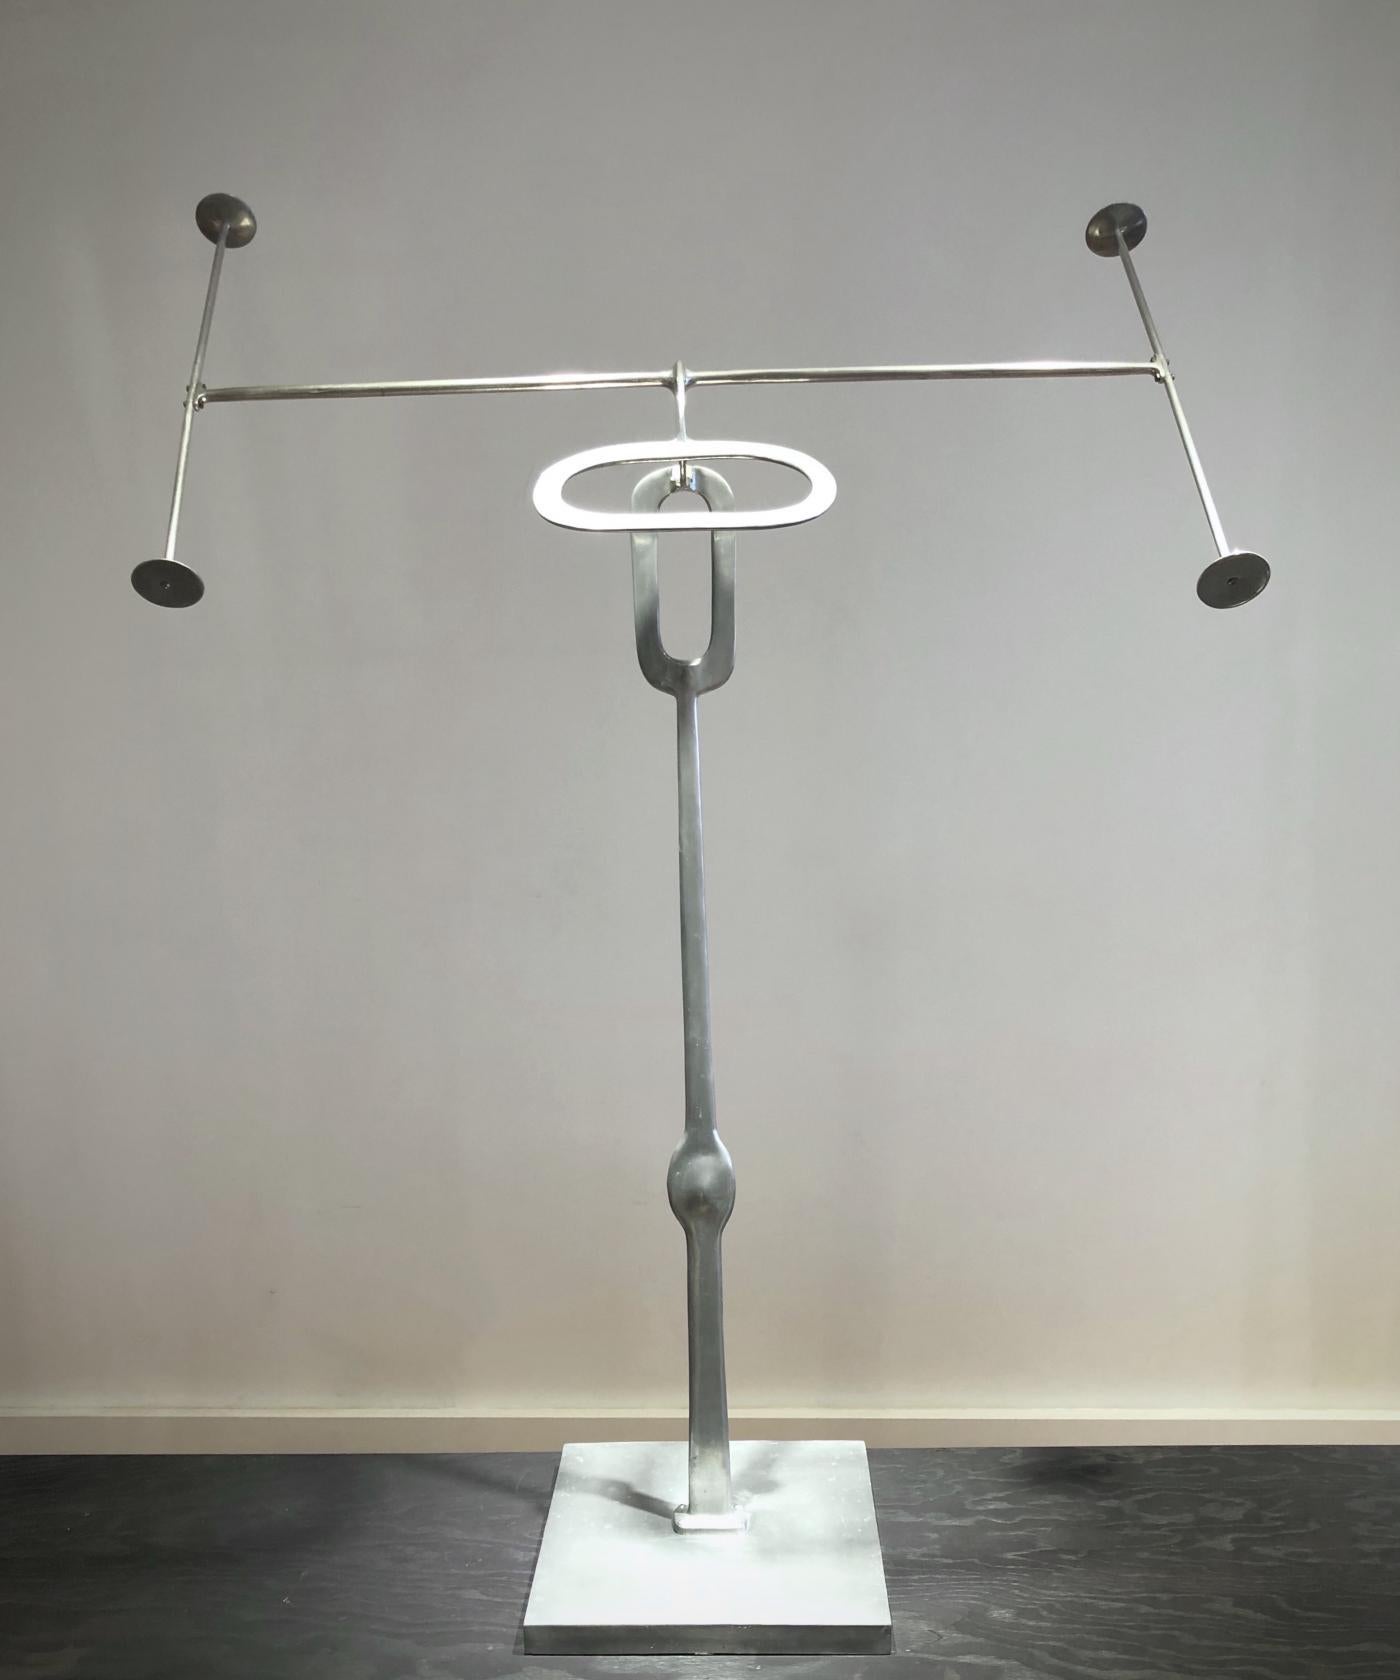 Prototype of the sculpture 'Equiliblre', aluminum, signed.